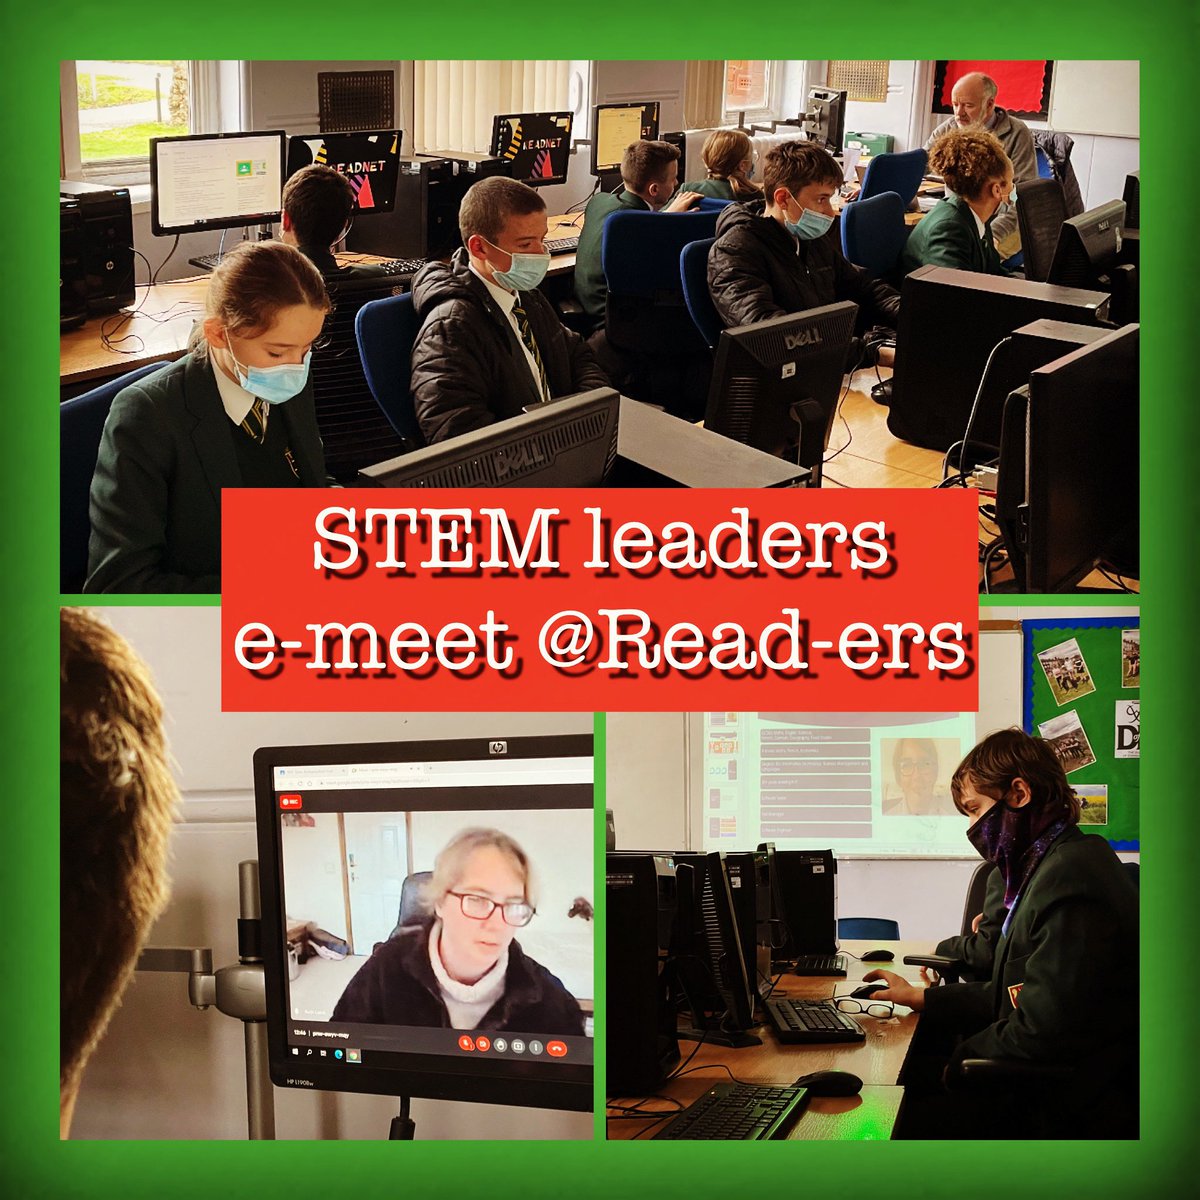 STEM experts spoke to Yr9 computing students about their careers, education & offered top employment tips. Experts showed STEM jobs provide stimulation, remuneration & satisfaction! Read educates for life, with real world skills. Thanks to speakers. 👏🏻 #computing #careers #topjob